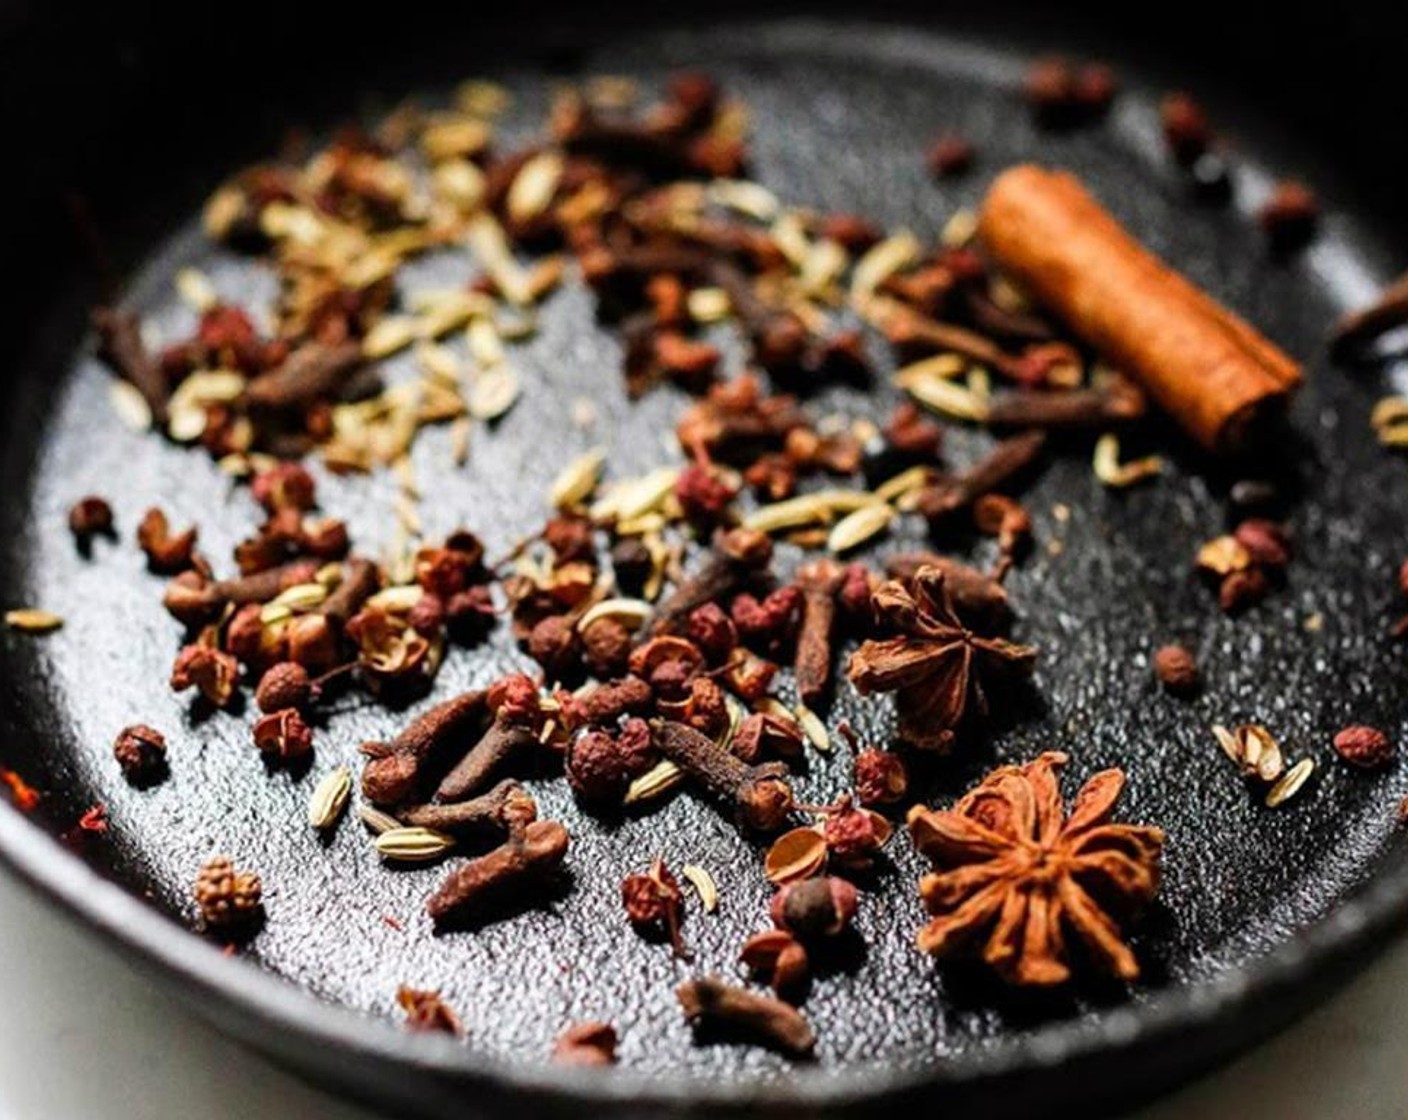 step 1 To make the Chinese Five Spice Powder, toast the Cinnamon Sticks (2 in), Whole Clove (1/2 Tbsp), Fennel Seeds (1/2 Tbsp), Star Anise (2), and Sichuan Peppercorns (1/2 Tbsp) in a skillet over medium heat until just fragrant, 1 to 2 minutes only.